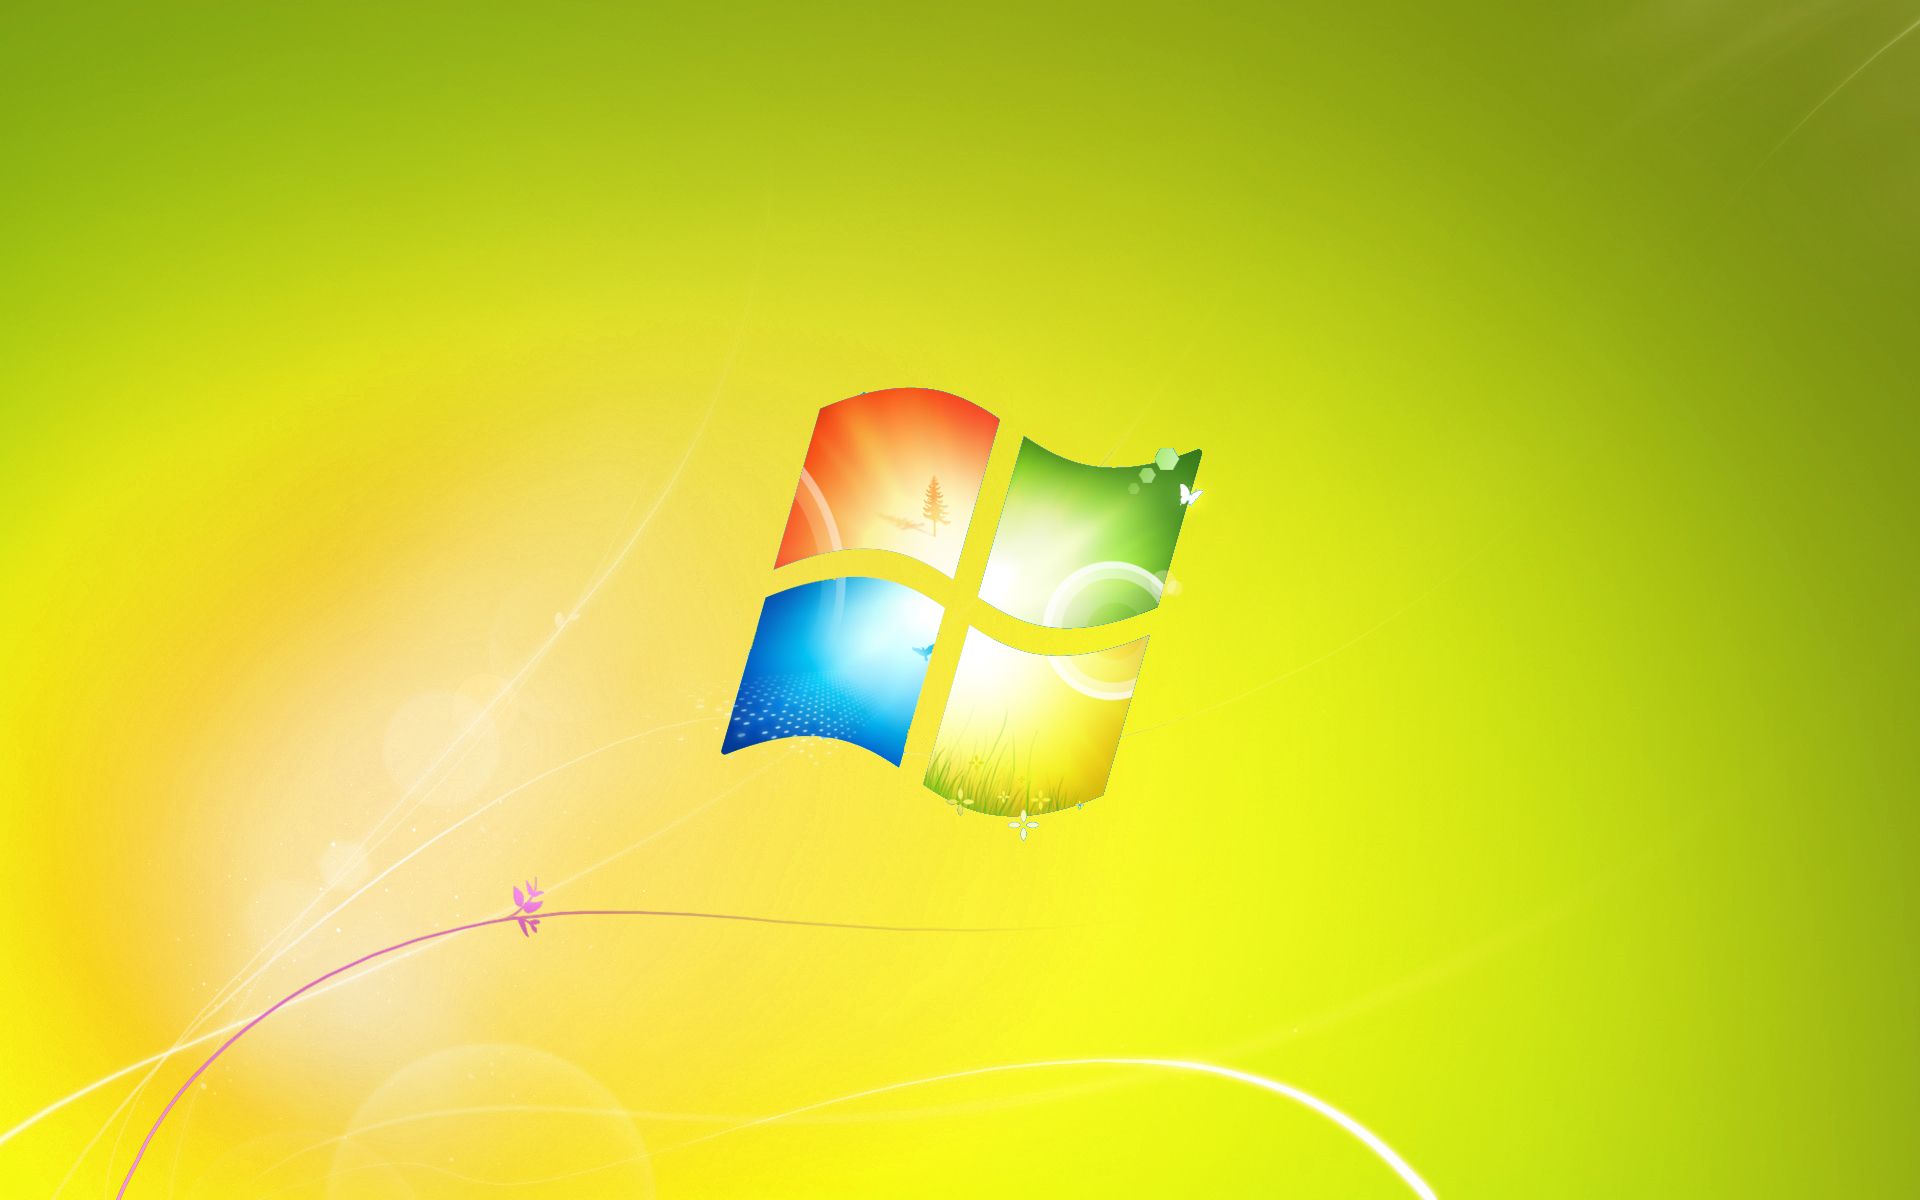 Windows 7 Default Wallpaper Yellow Version by dominichulme on ...